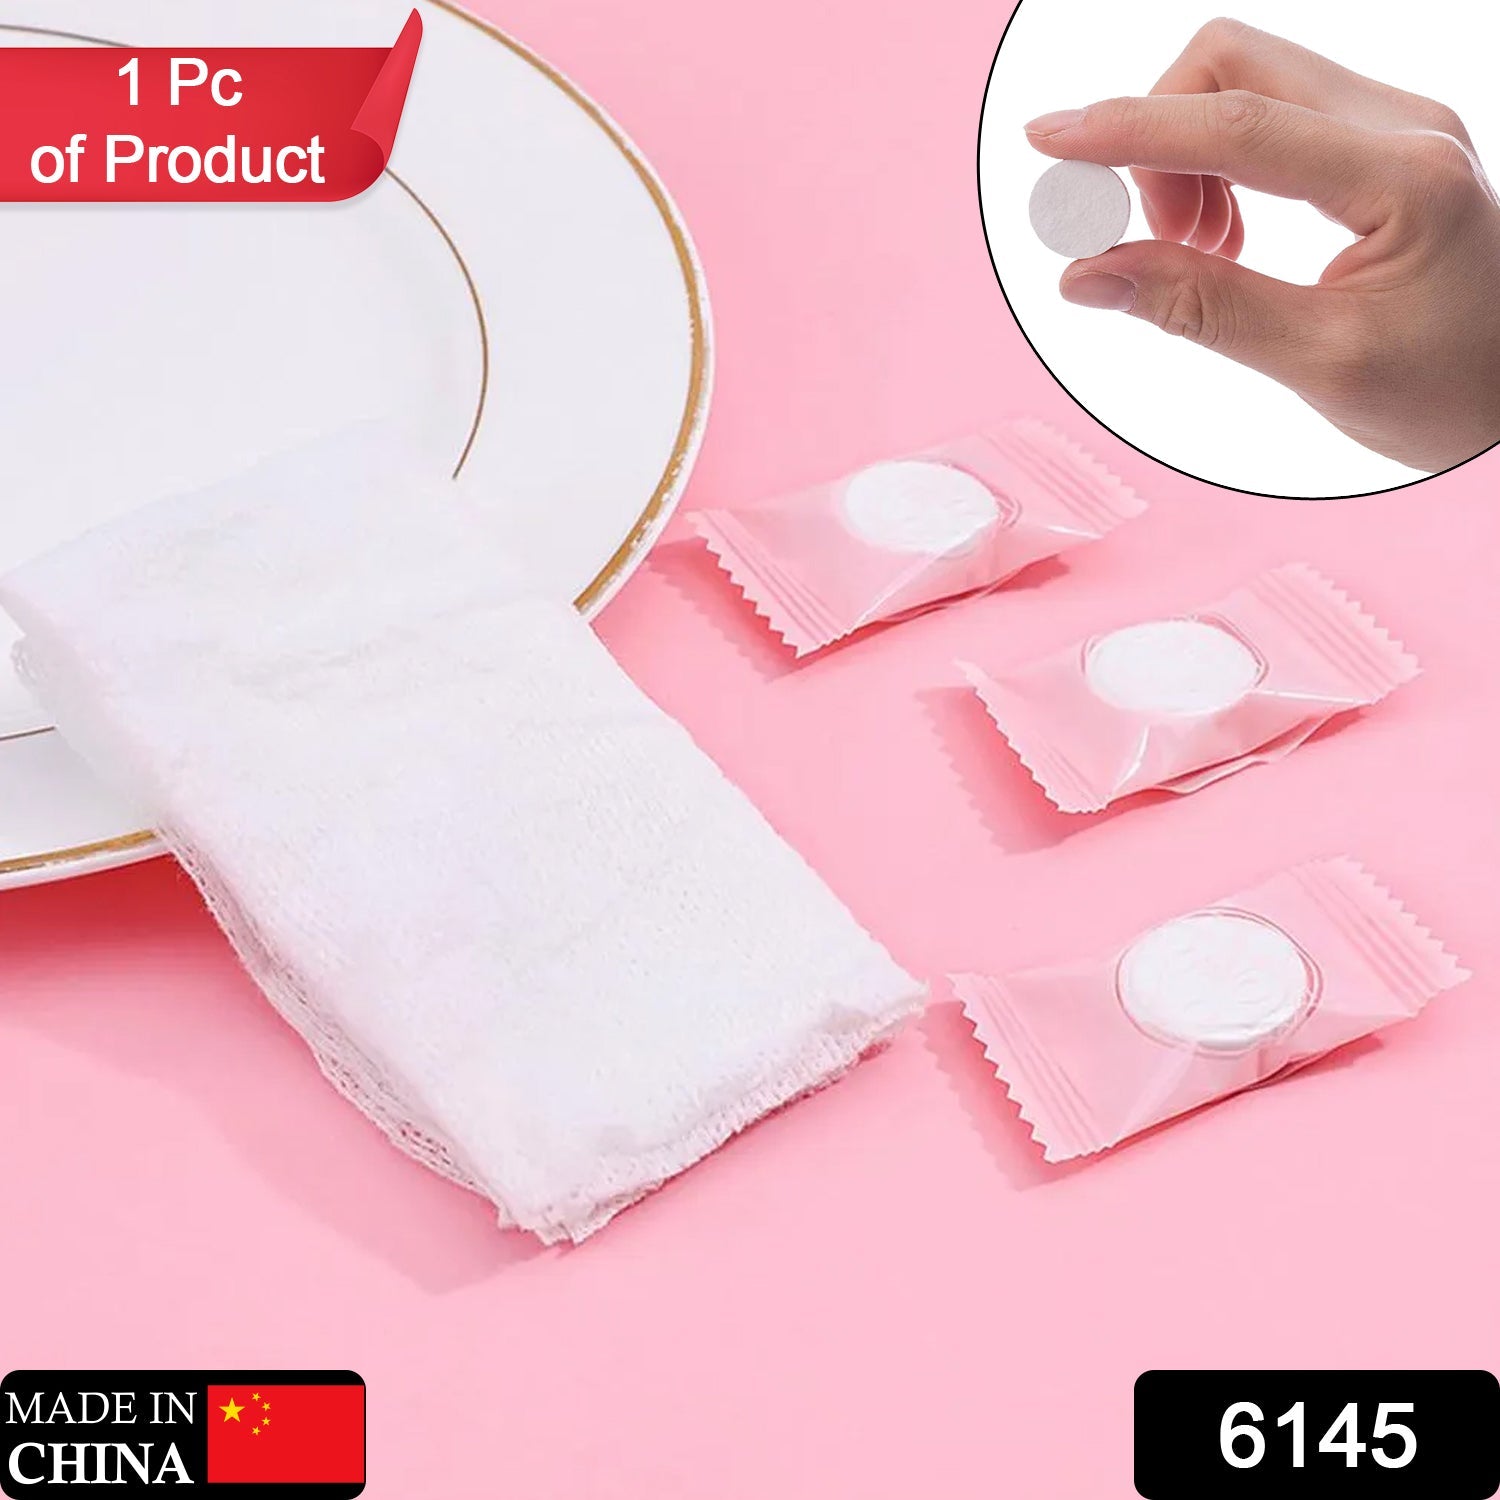 6145 Compressed Facial Face Sheet tablets Outdoor Travel Portable Face Towel Disposable Magic Towel Tablet Capsules Cloth Wipes Paper Cotton Tissue Mask Expand With Water DeoDap